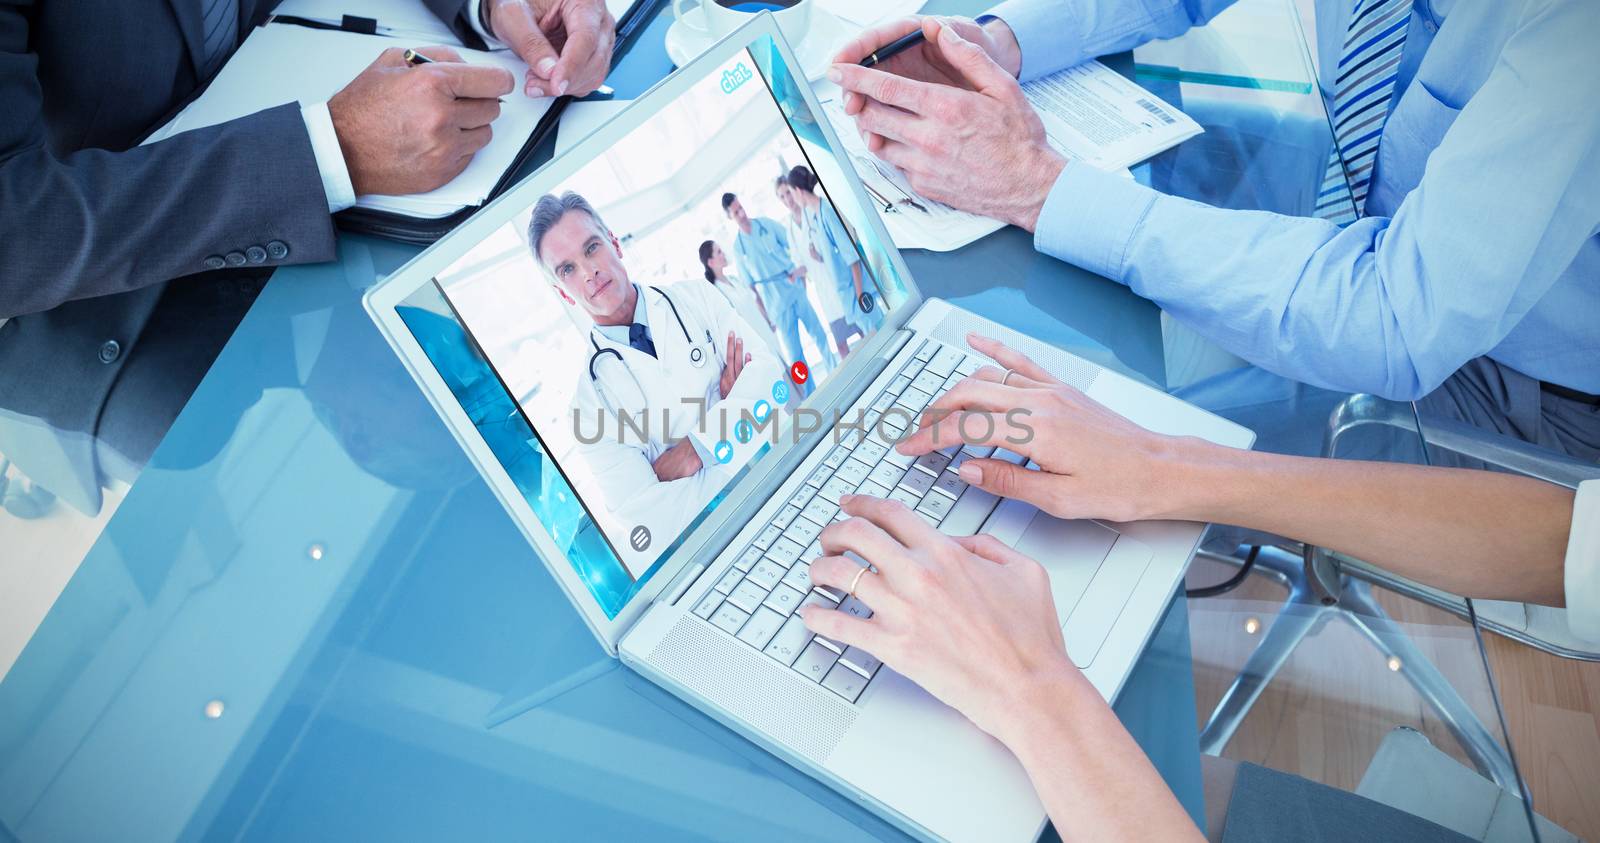 Business people in discussion in an office against smiling doctor with arms crossed